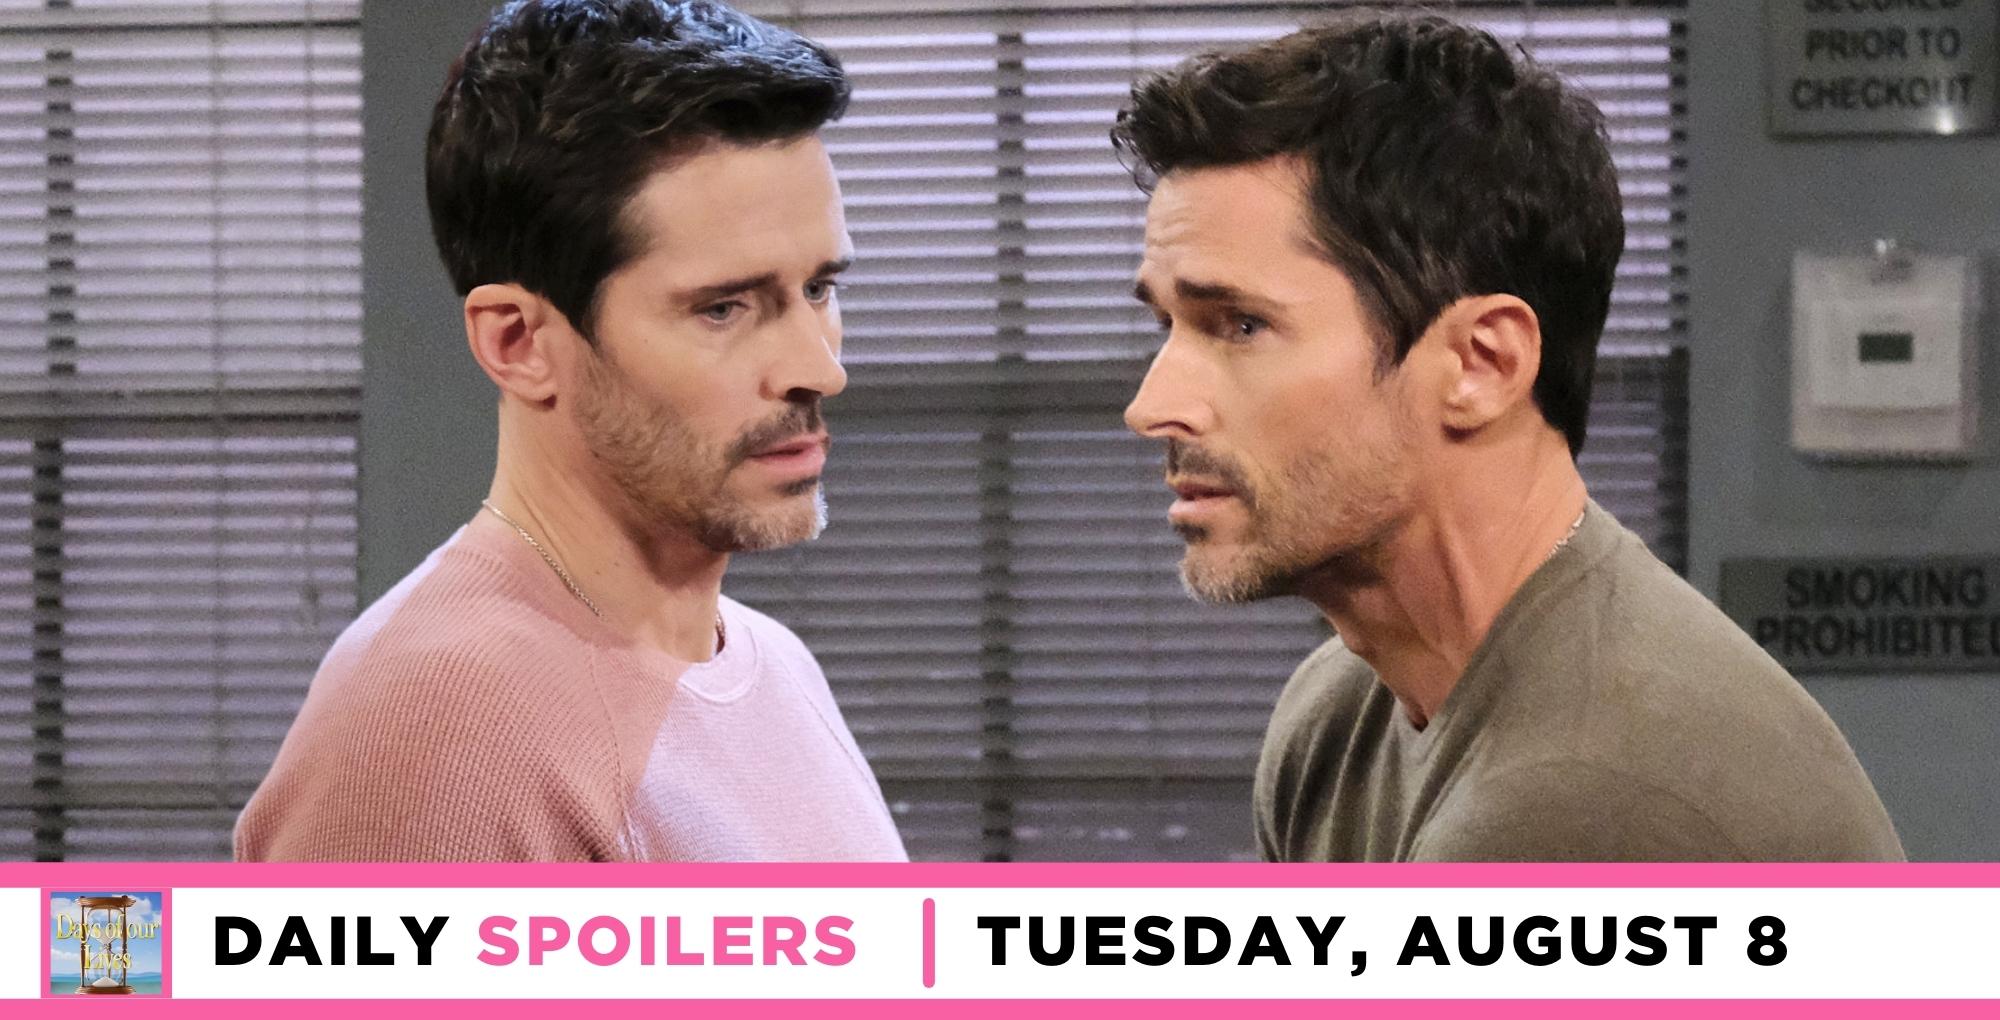 days of our lives spoilers for august 8, 2023, have double image of shawn brady.